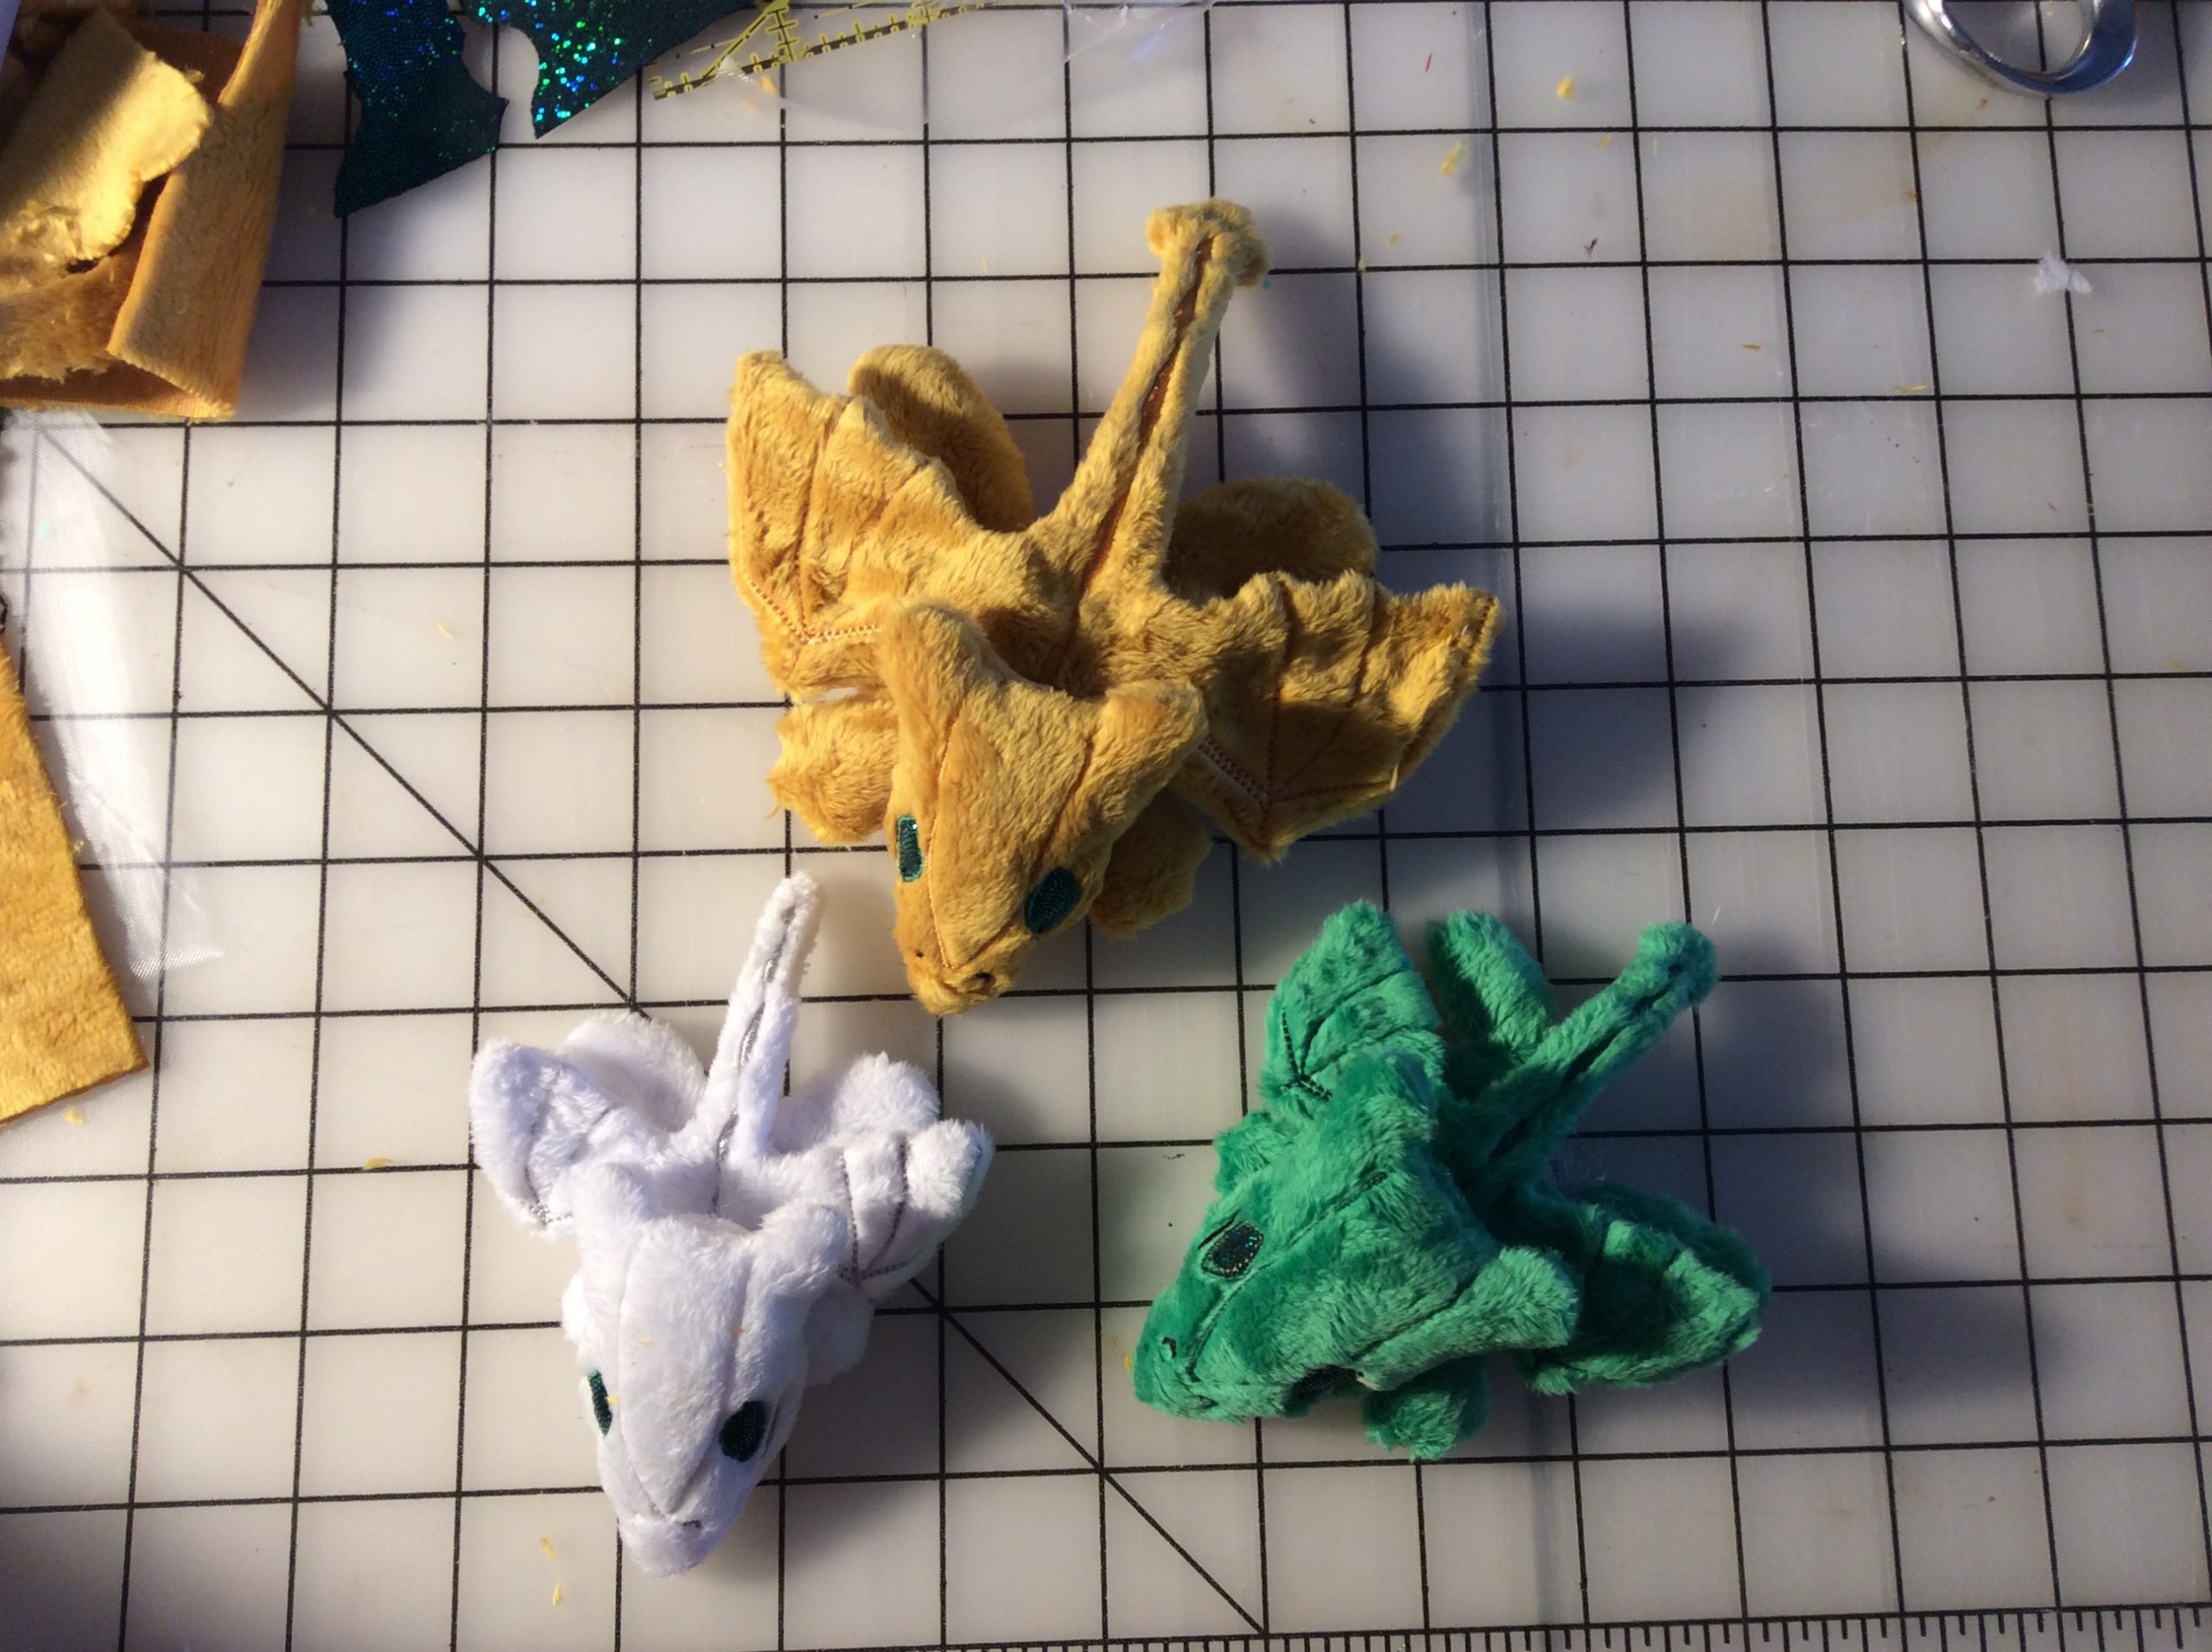 Three different sizes/proportions of tiny plush dragons.